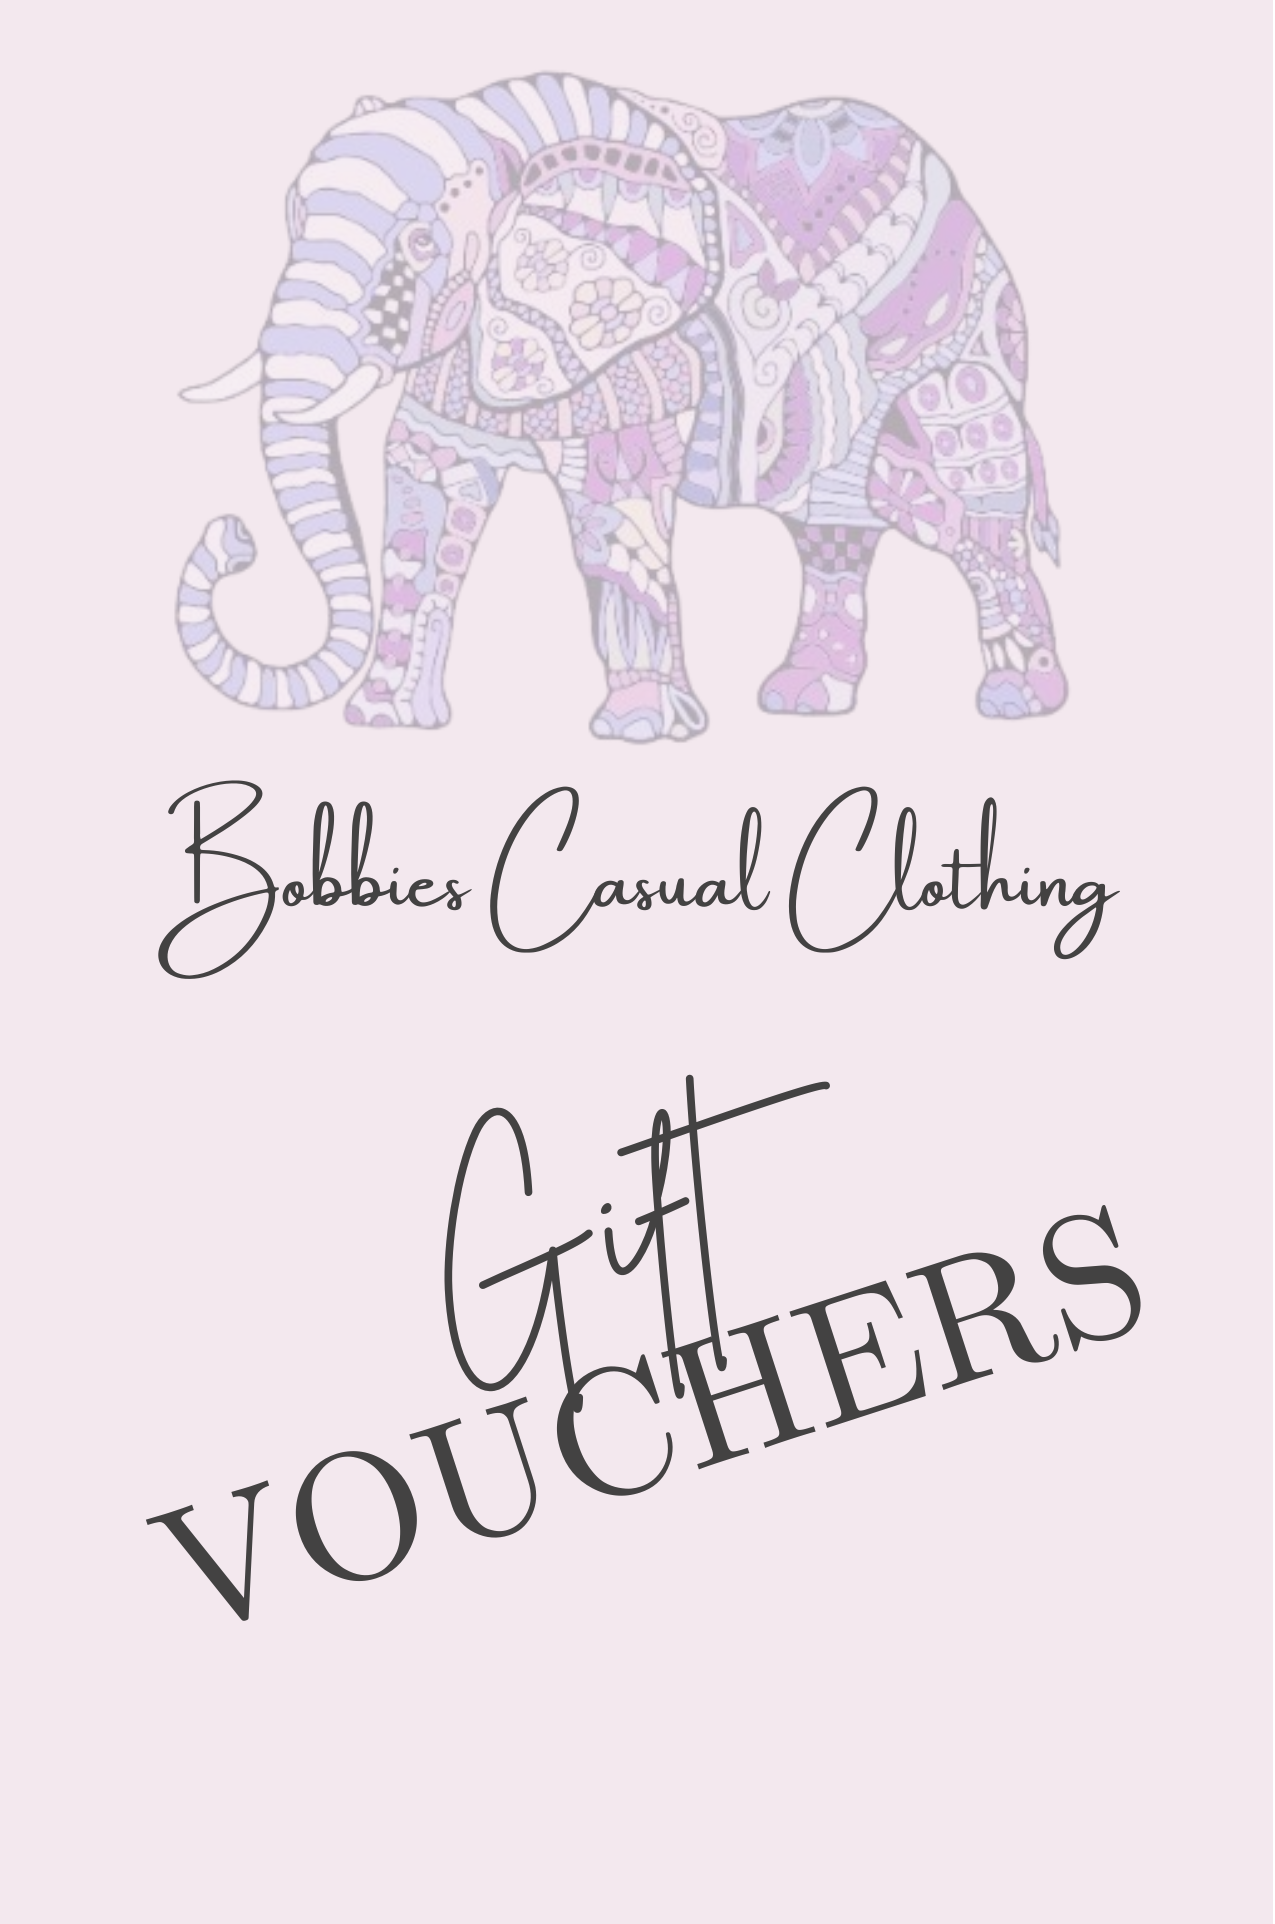 Bobbies Casual Clothing Gift Vouchers